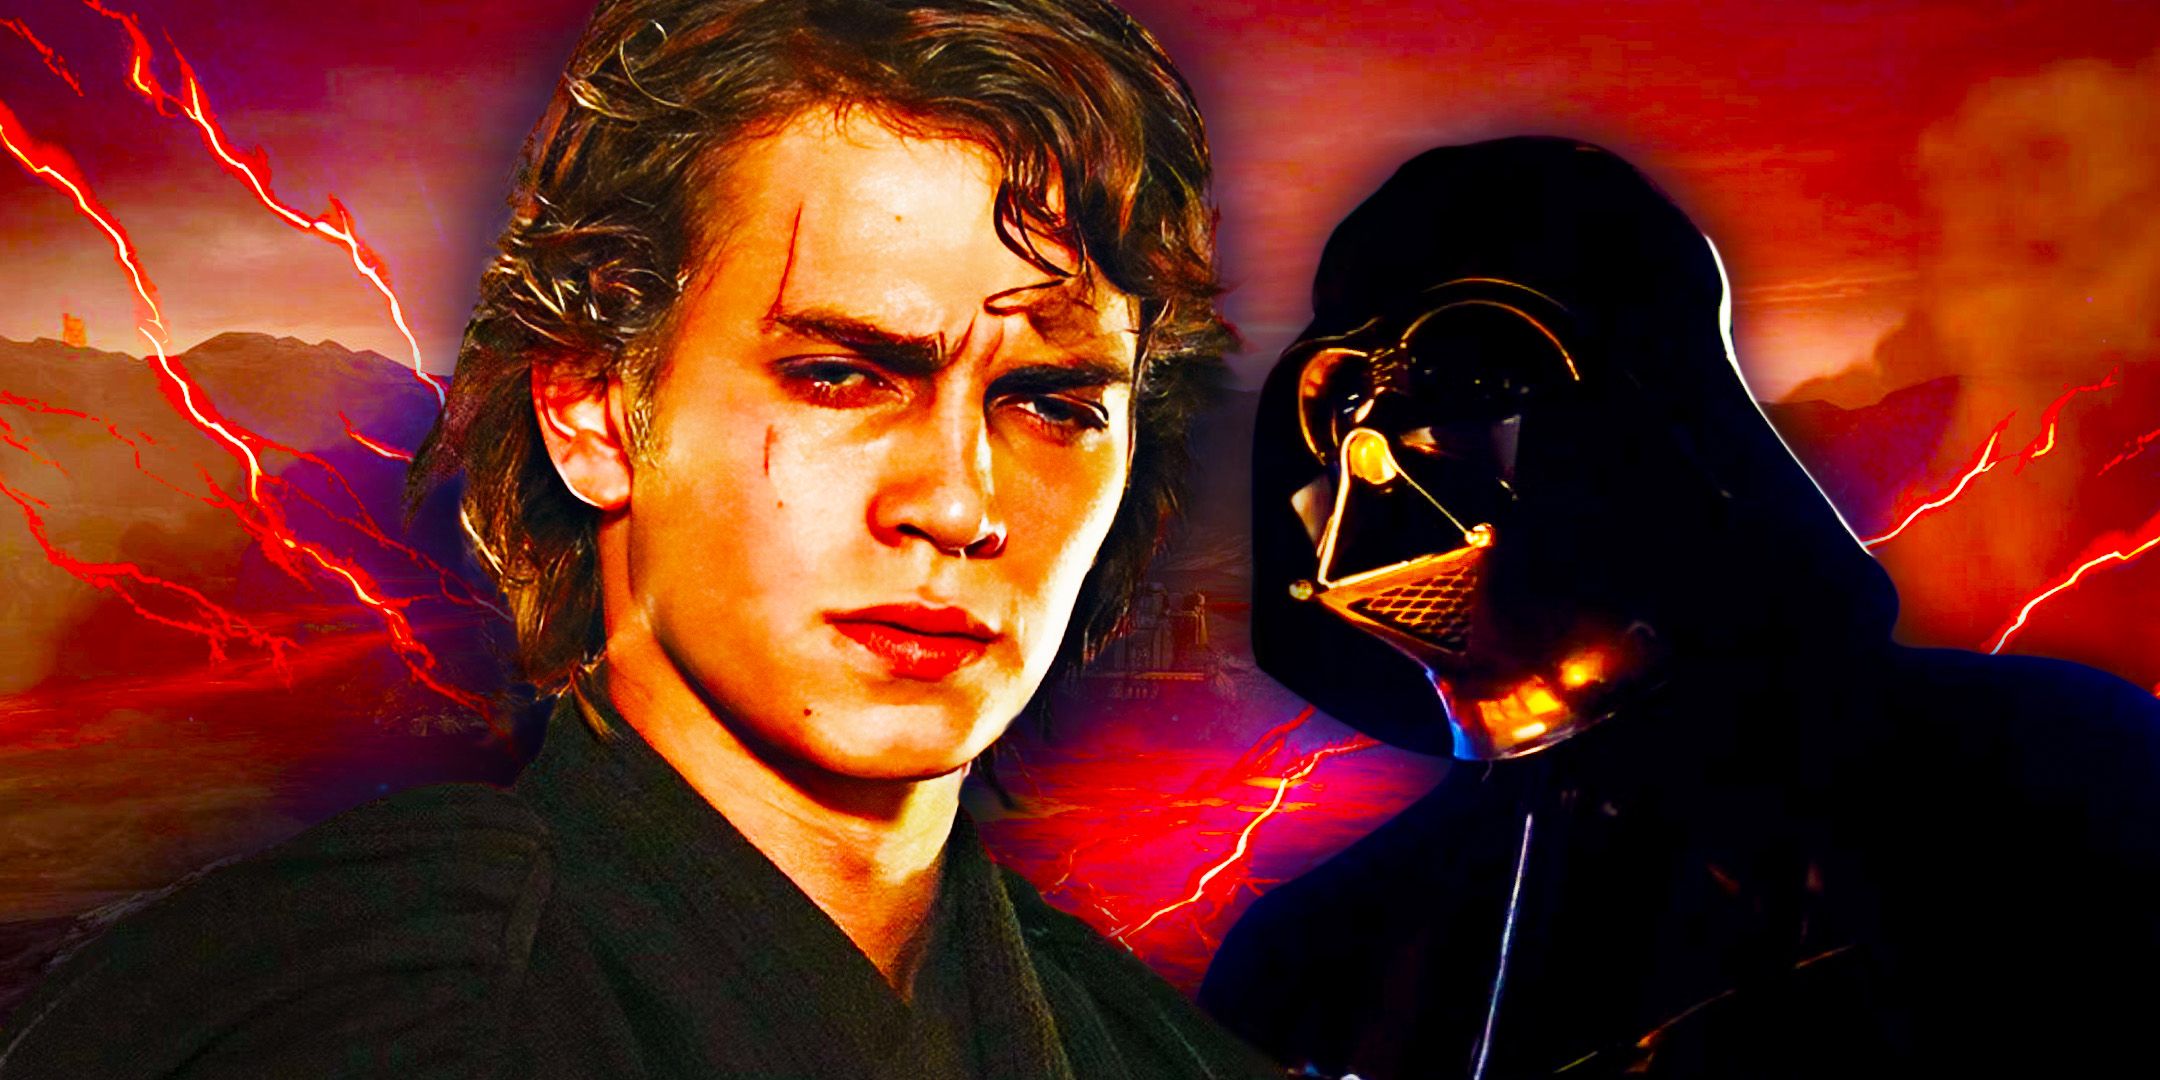 Anakin Skywalker in Revenge of the Sith to the left and Darth Vader to the right in a combined image in front of a red background image with lightning 